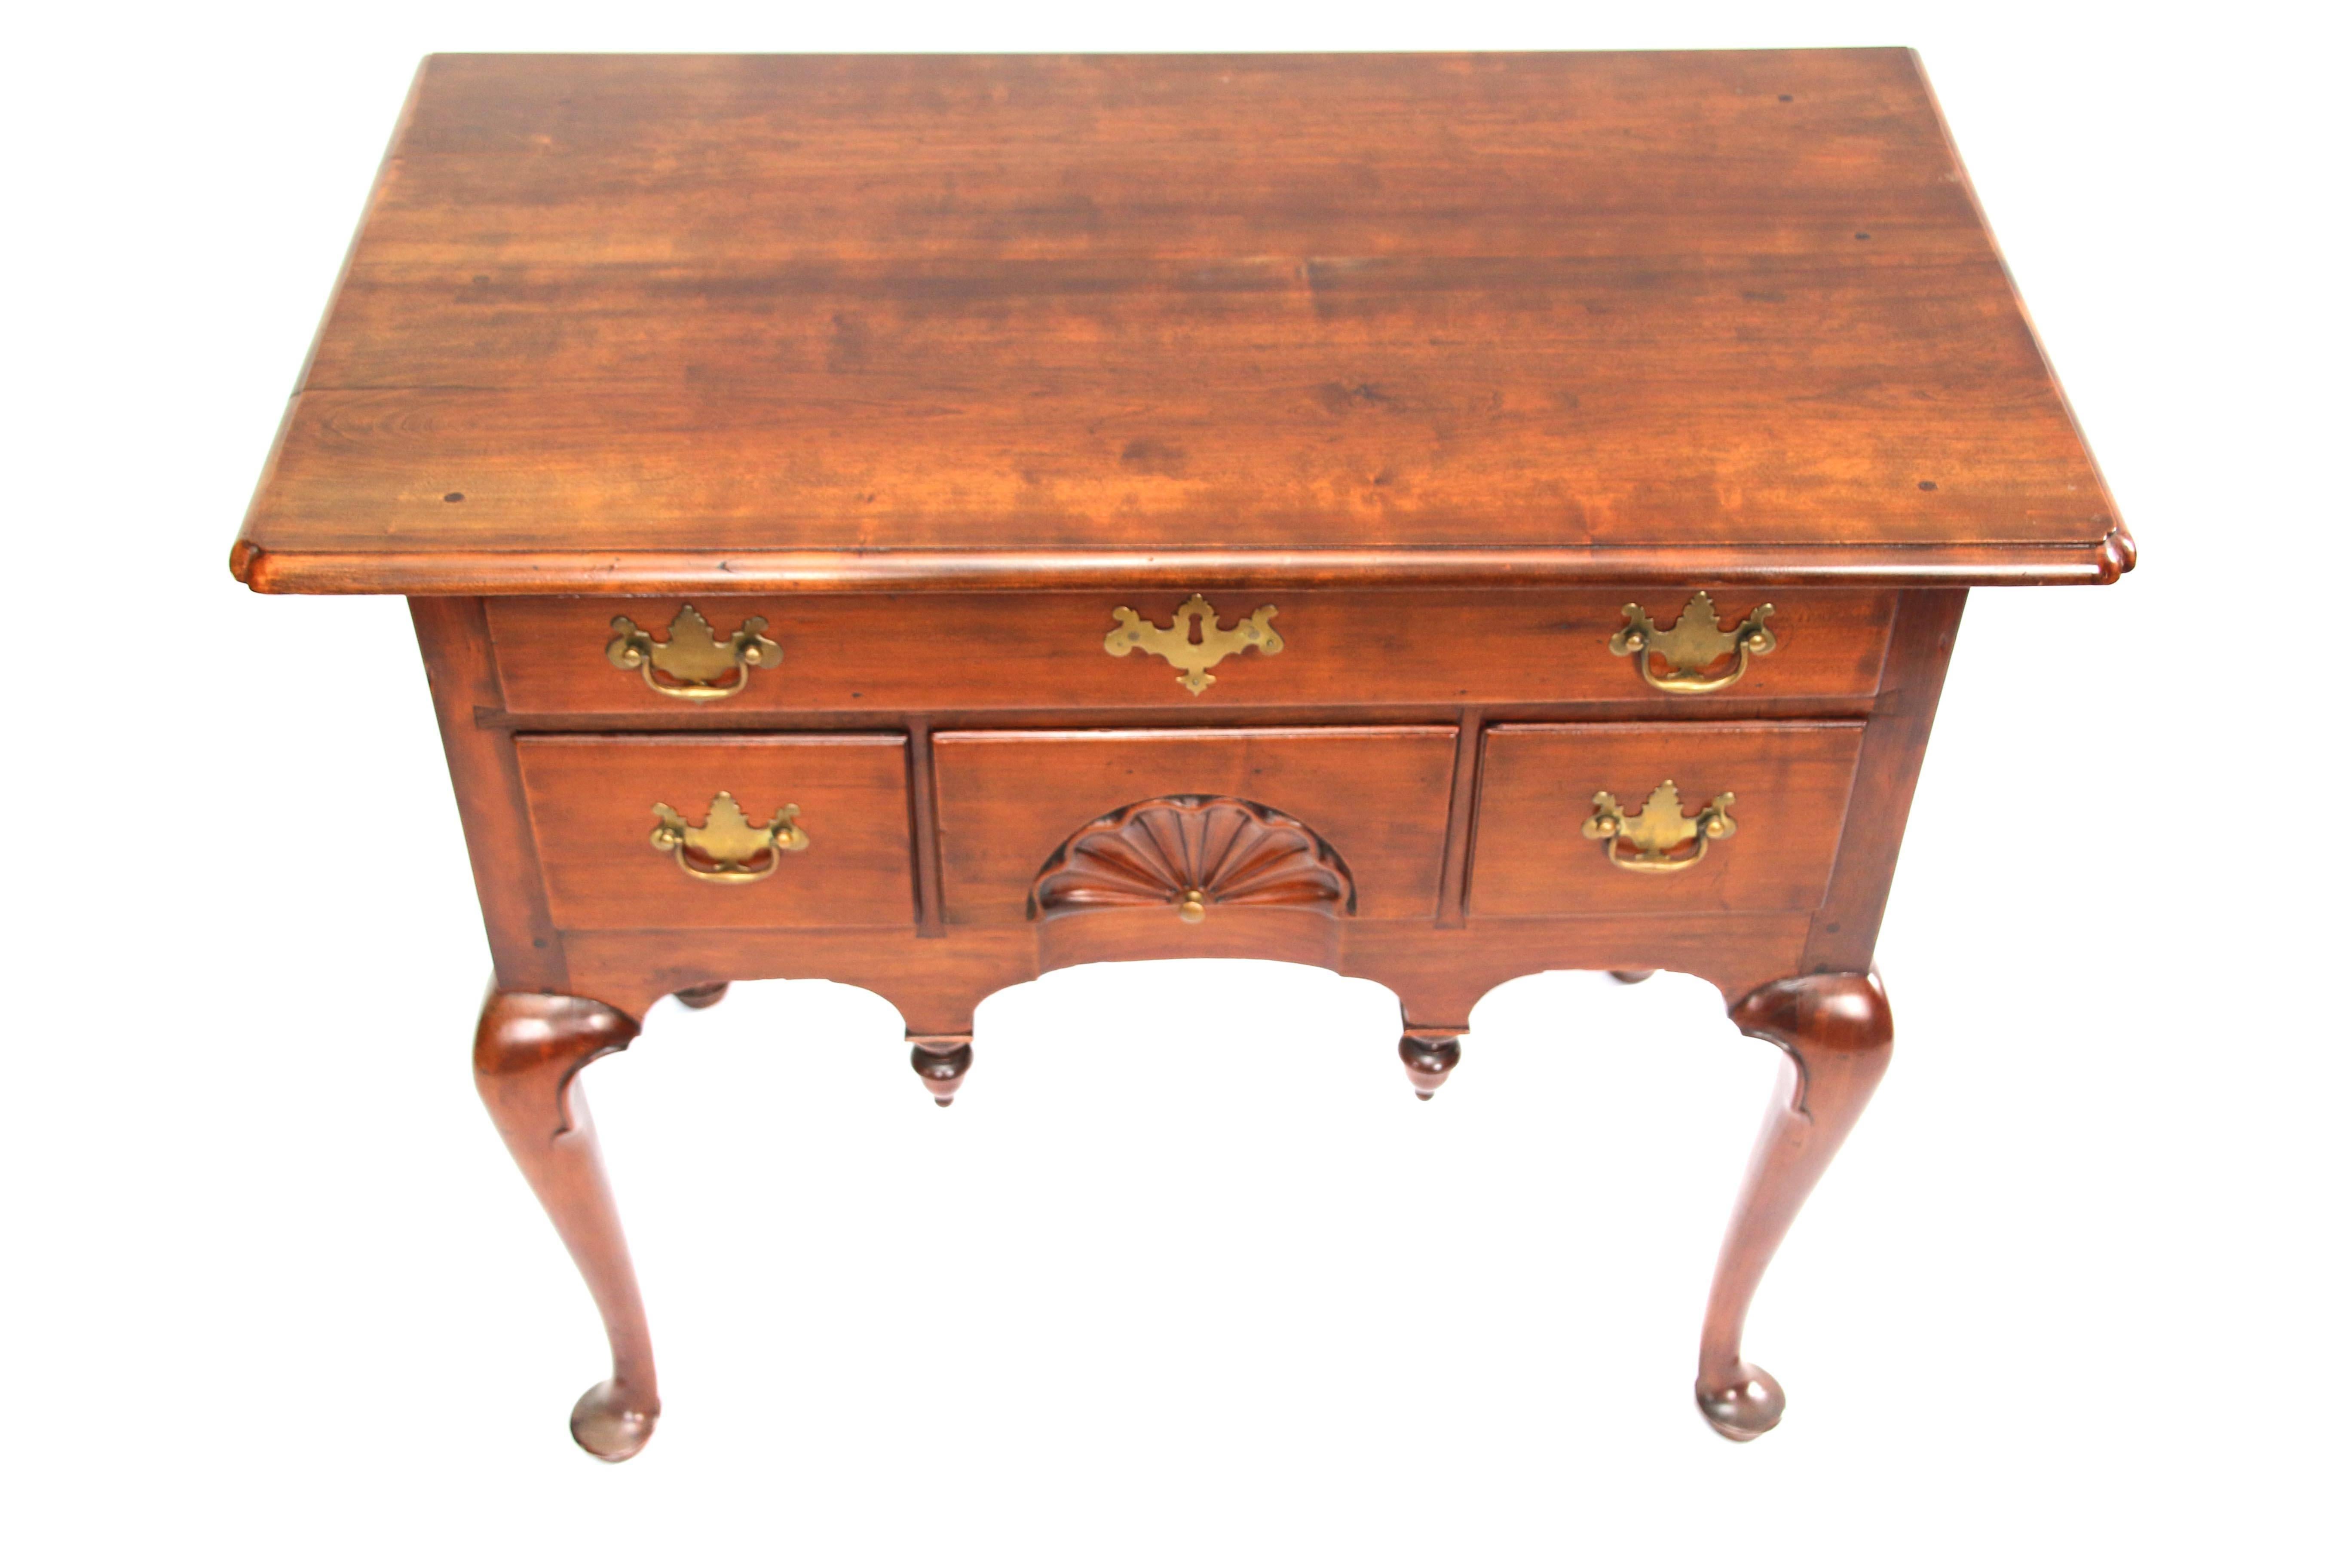 Connecticut 18th Century Queen Anne Cherrywood Lowboy In Excellent Condition For Sale In Woodbury, CT